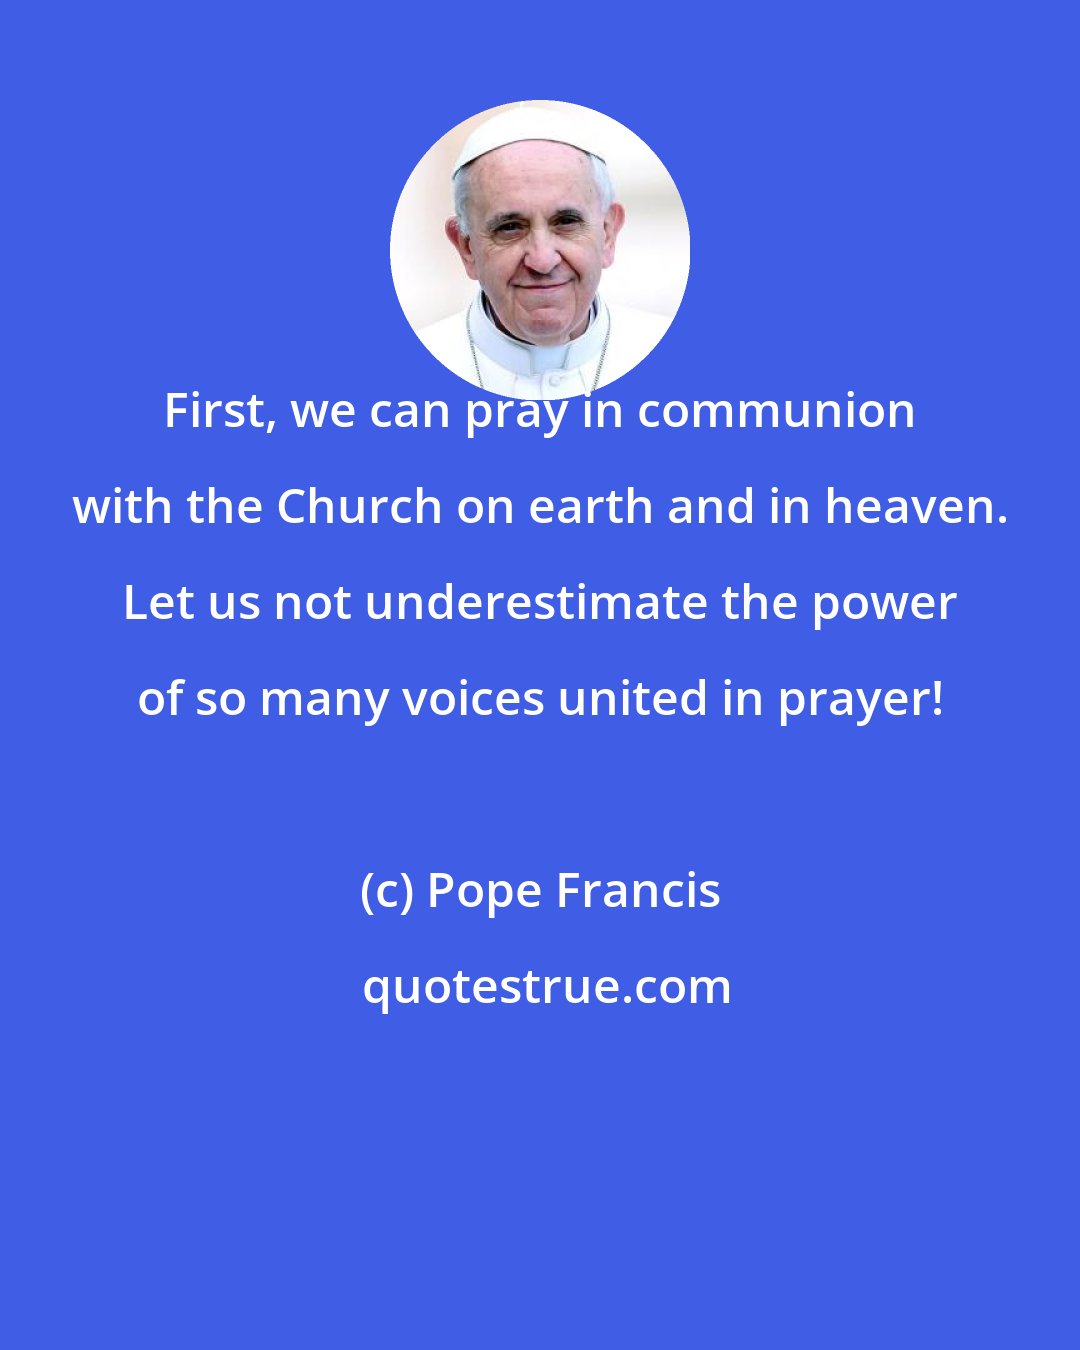 Pope Francis: First, we can pray in communion with the Church on earth and in heaven. Let us not underestimate the power of so many voices united in prayer!